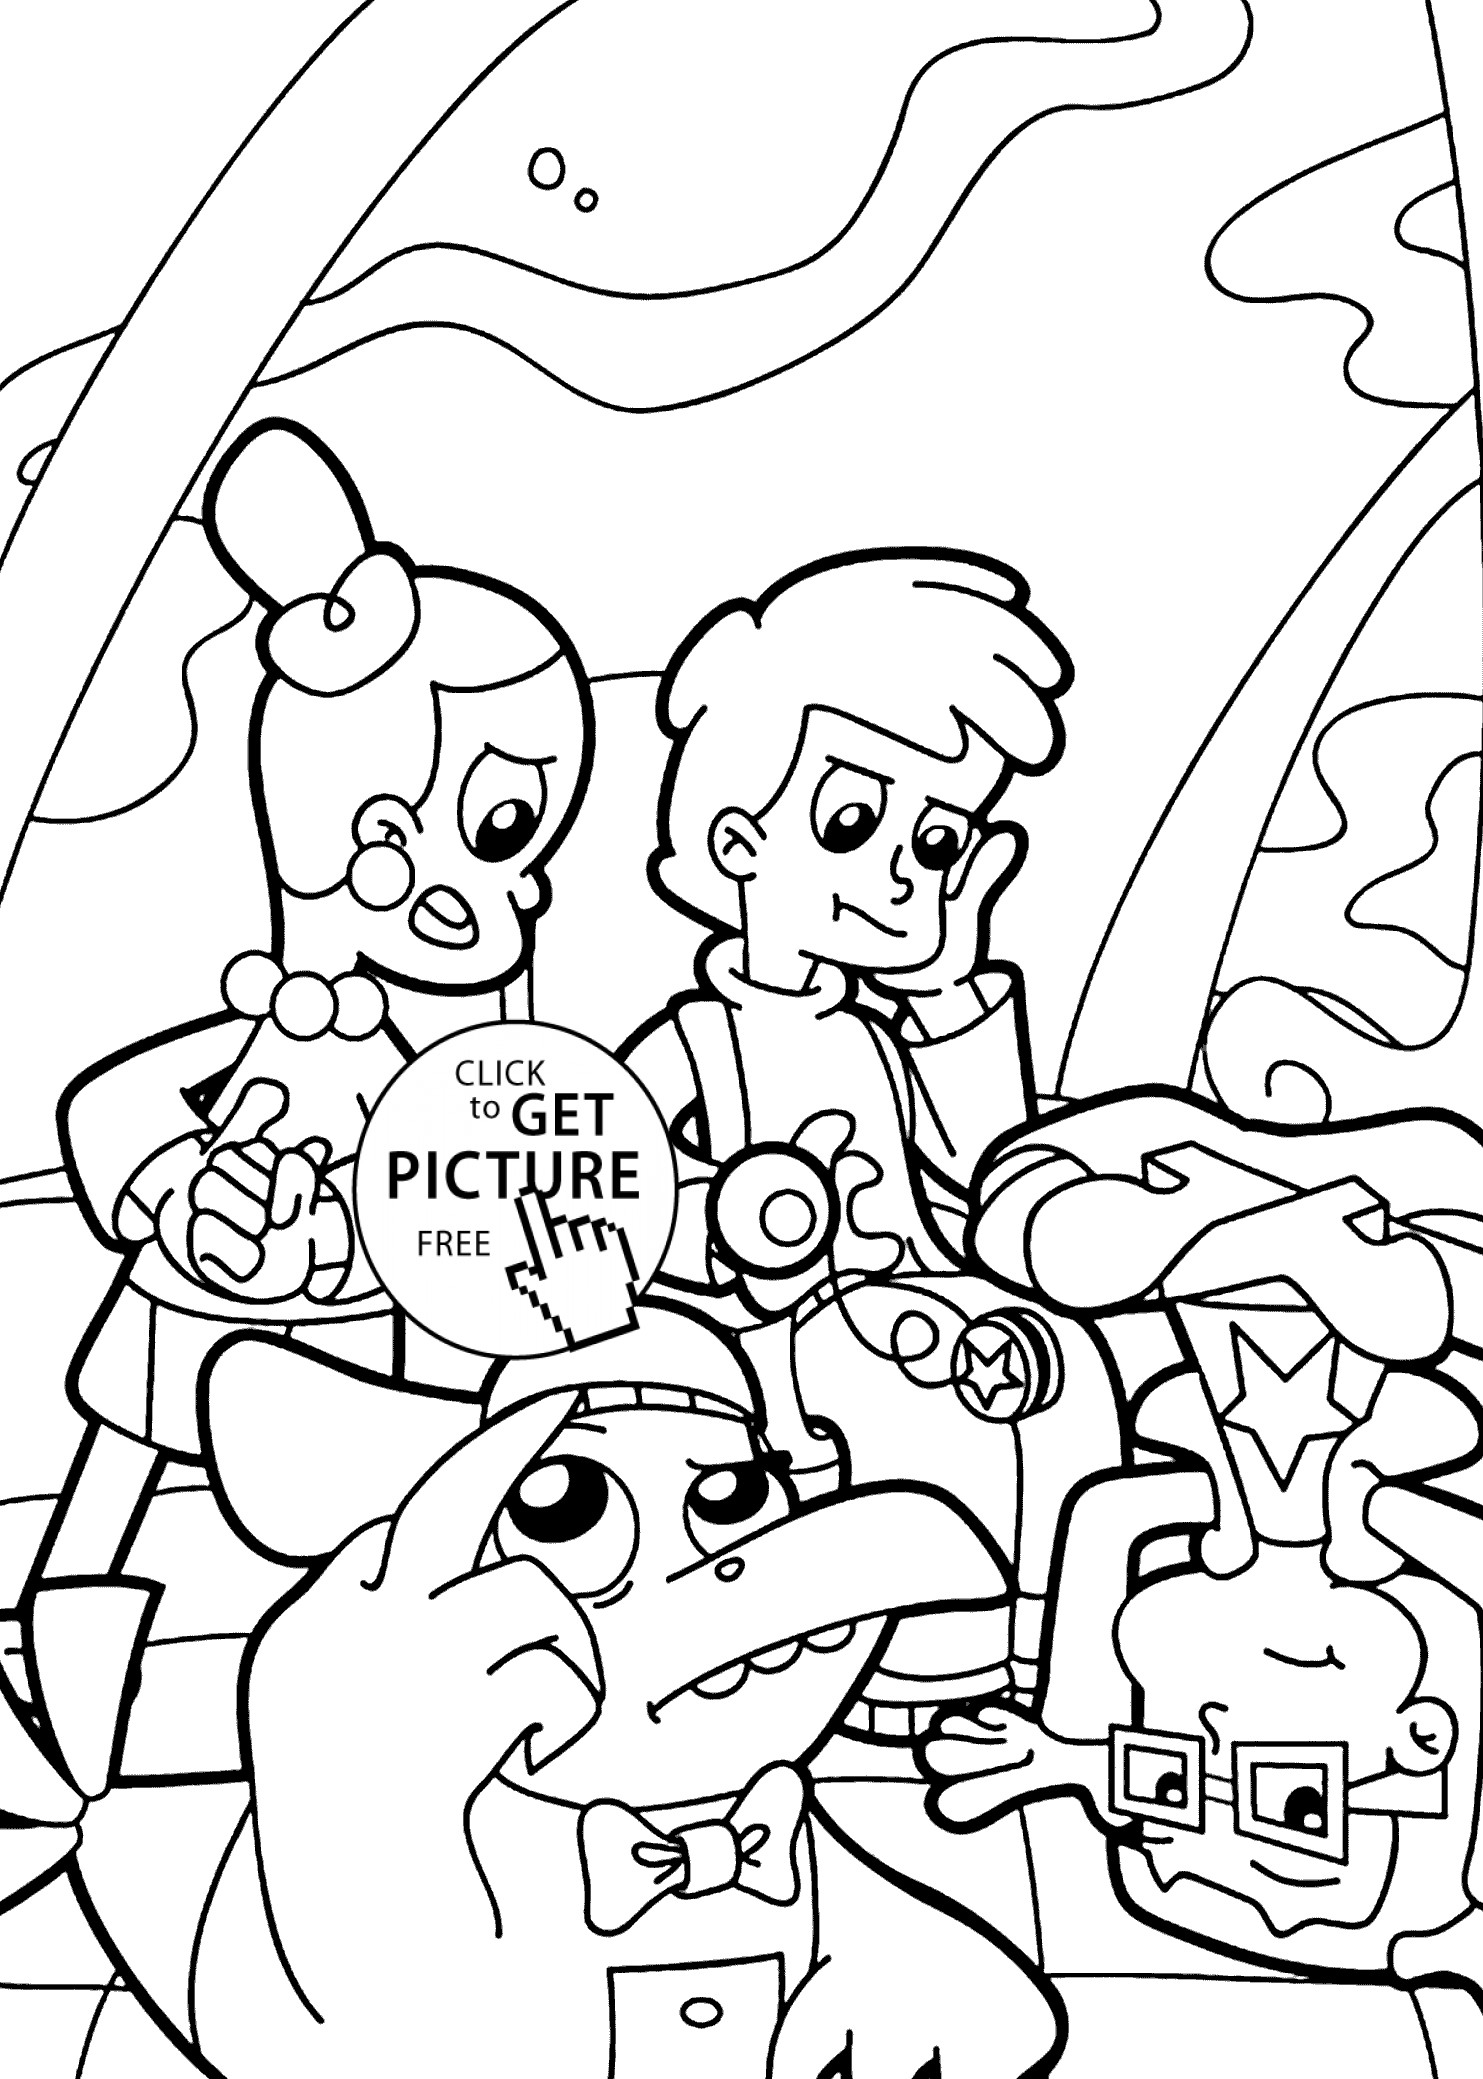 Coloring Book For Kids
 Cyberchase coloring pages for kids printable free